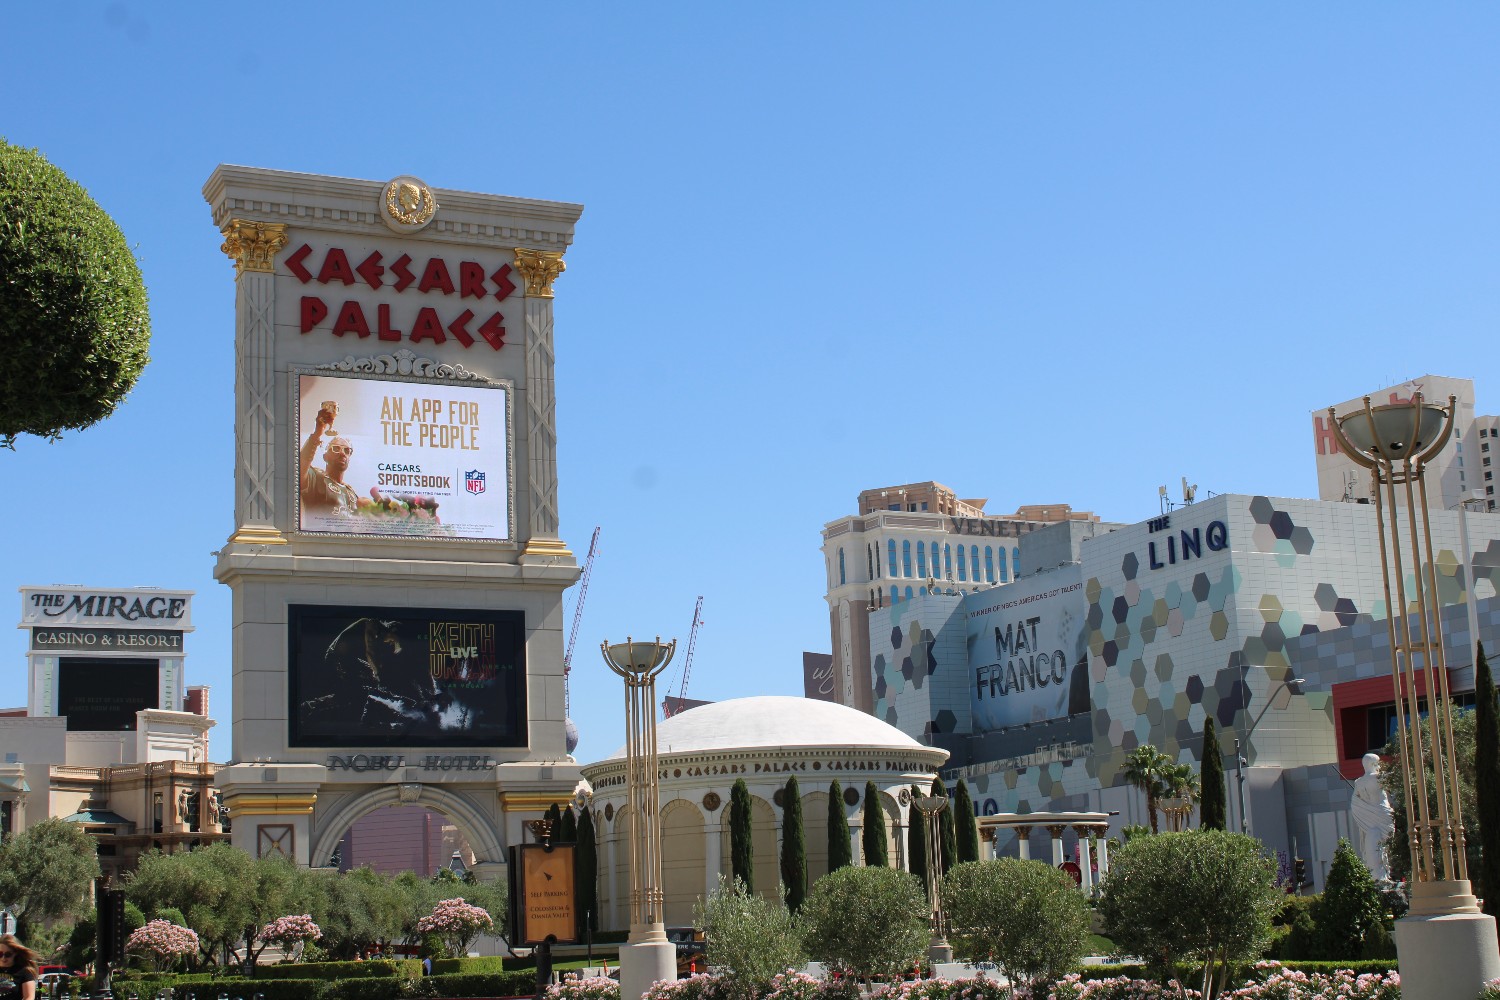 The Colosseum at Caesars Palace to undergo renovation, Caesars Palace,  technology, renovation